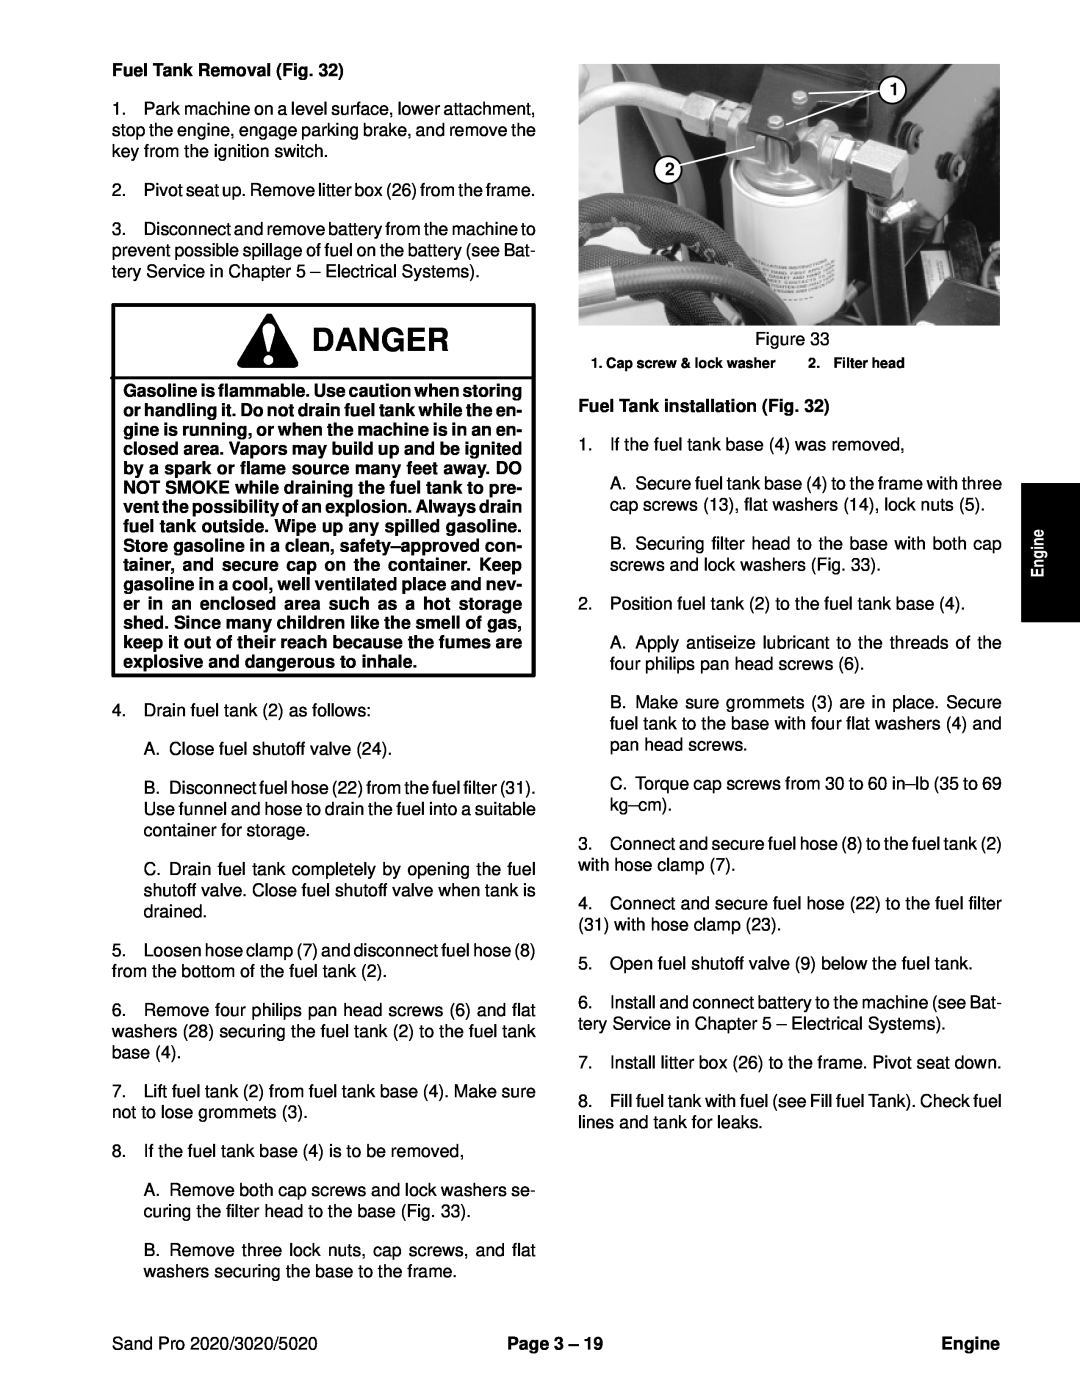 Toro service manual Danger, Fuel Tank Removal Fig, Fuel Tank installation Fig, Engine, Sand Pro 2020/3020/5020, Page 3 